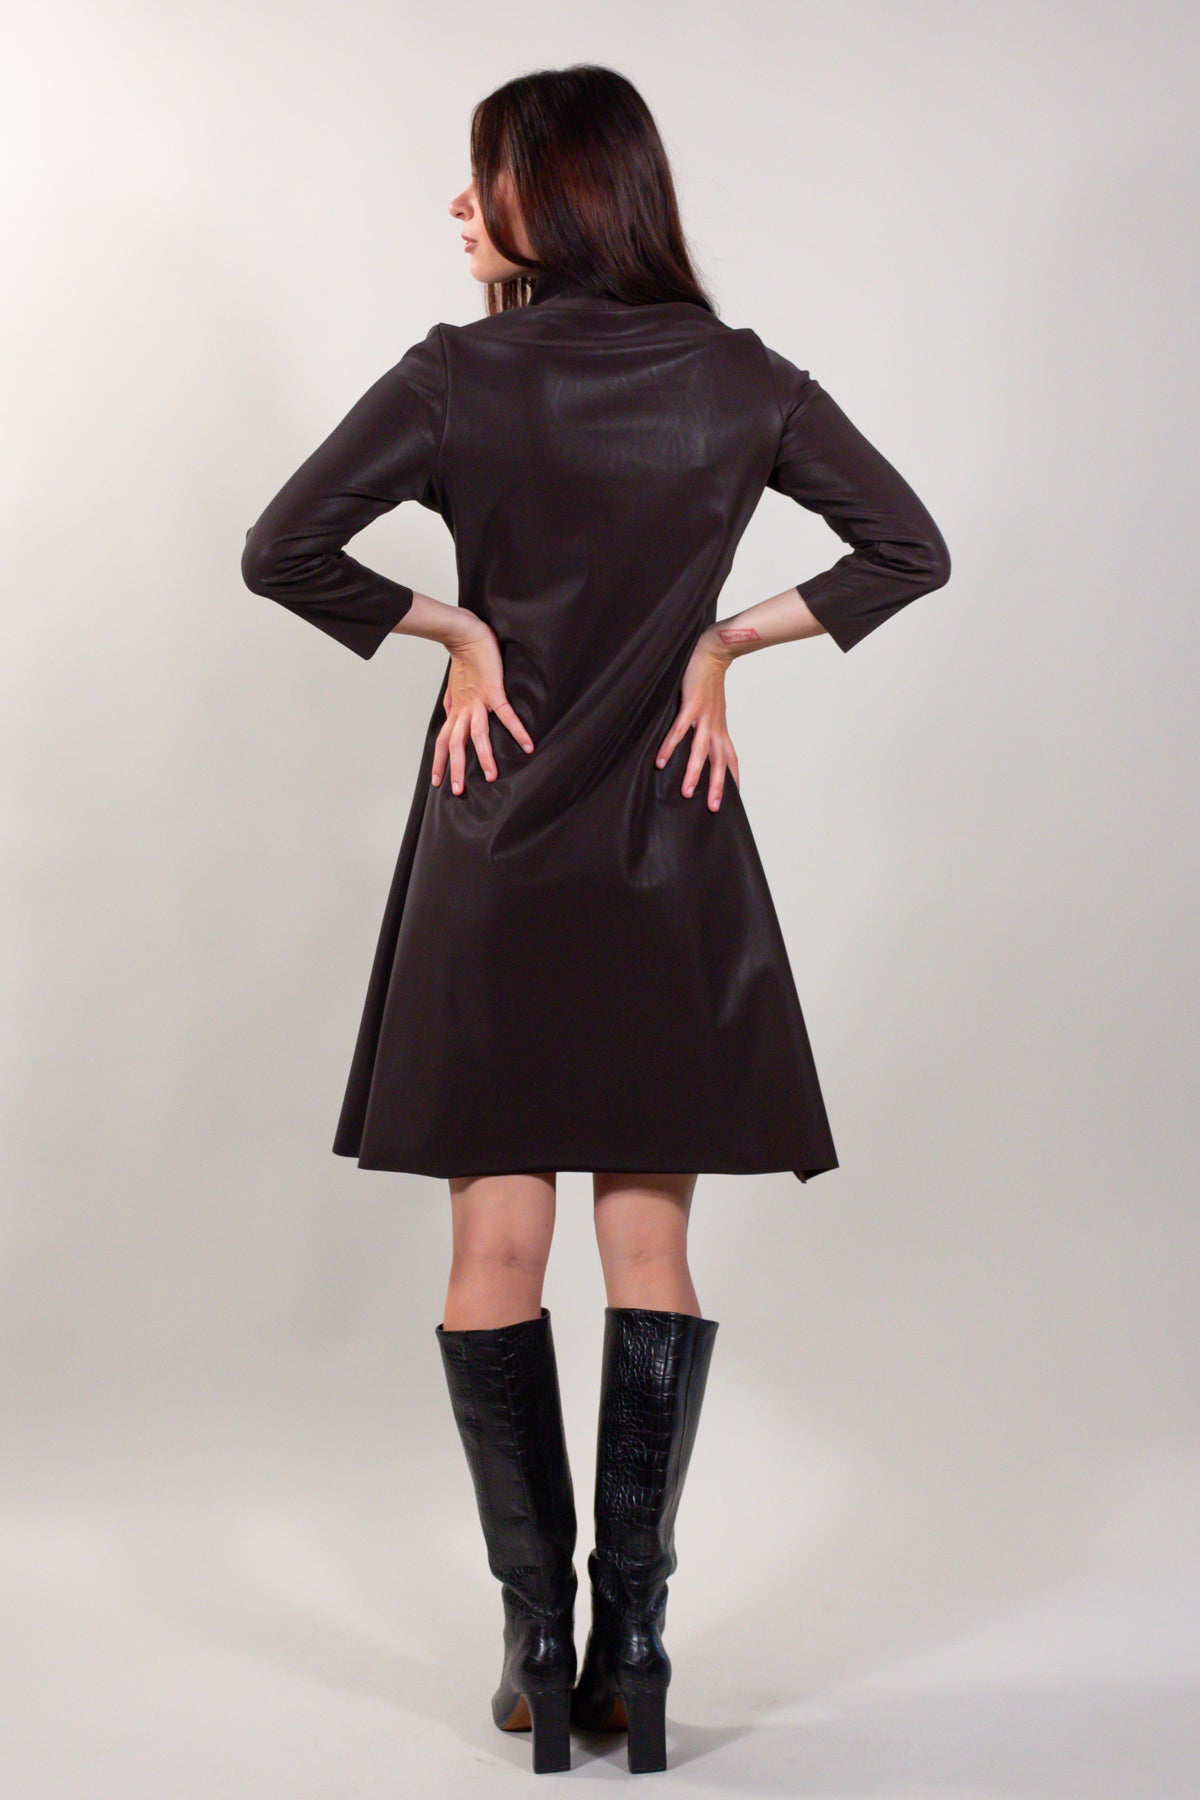 RUBBERED ECO-LEATHER DRESS